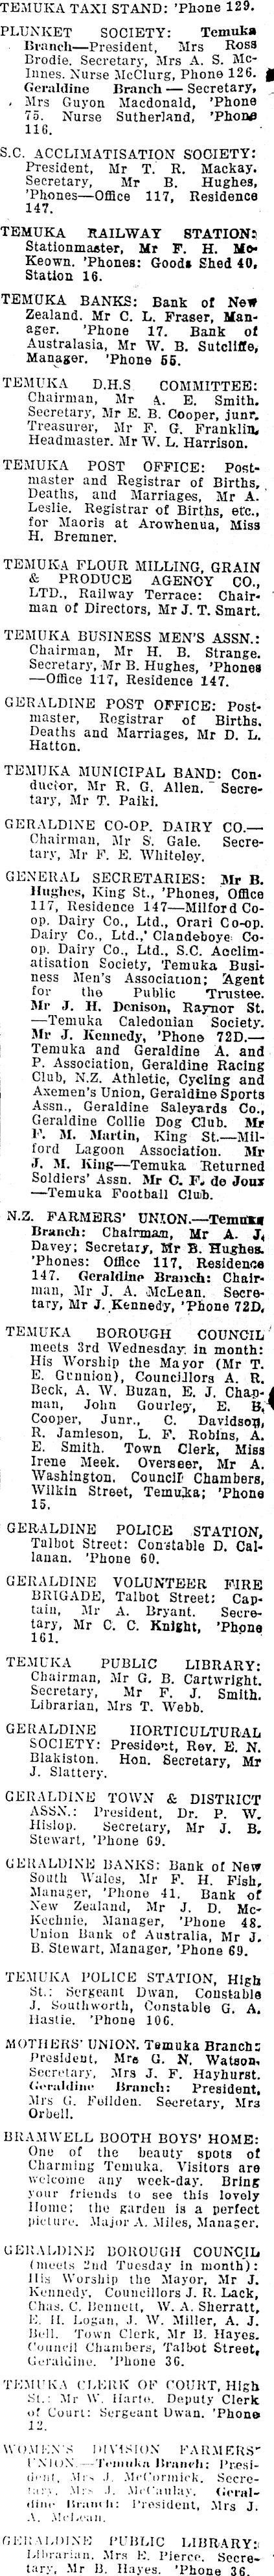 Papers Past Newspapers Temuka Leader 7 April 1931 Useful Information